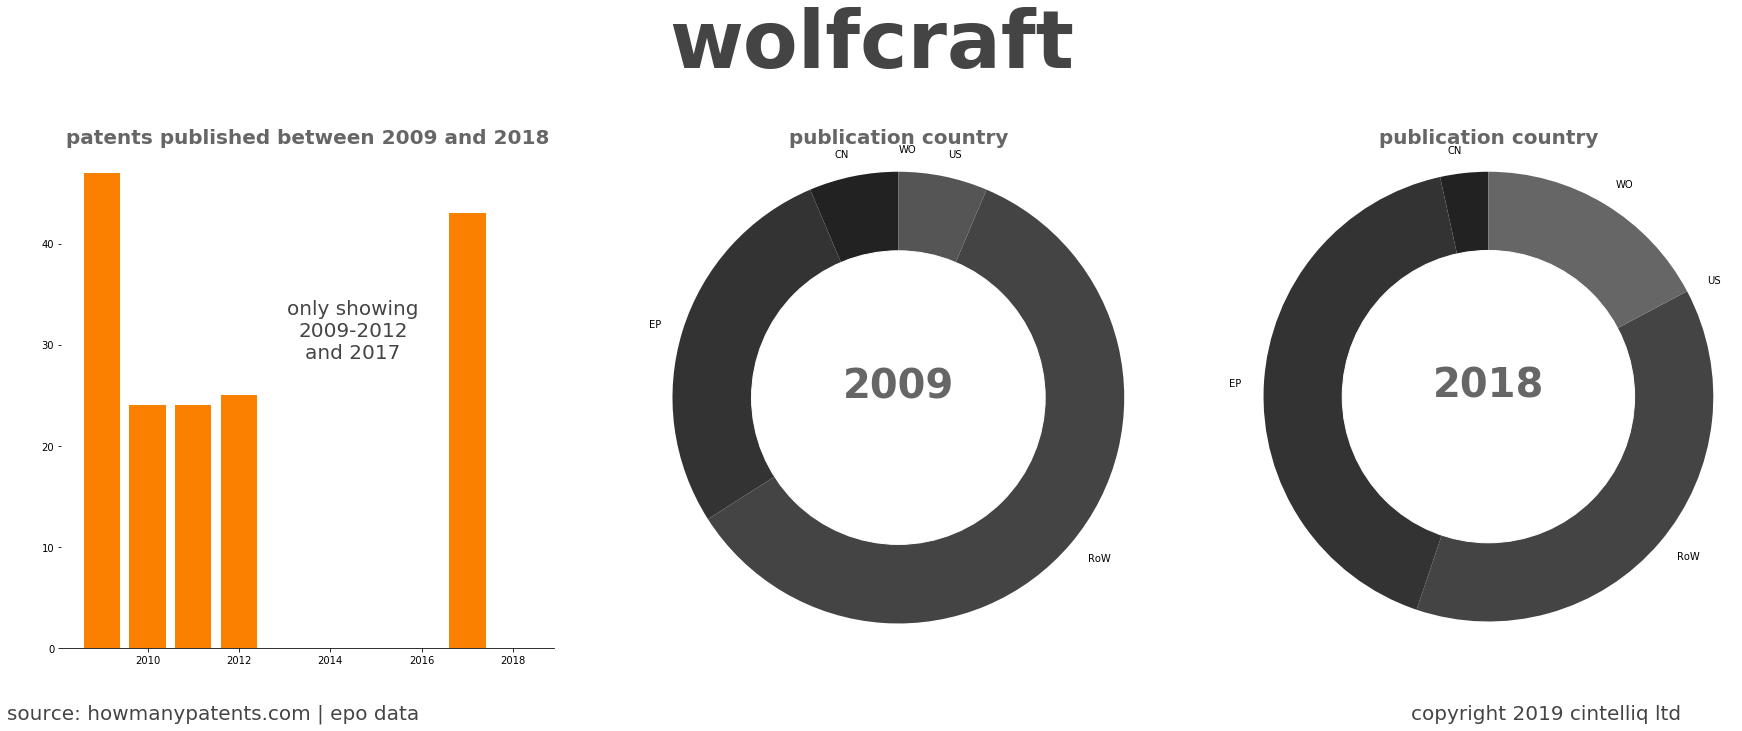 summary of patents for Wolfcraft